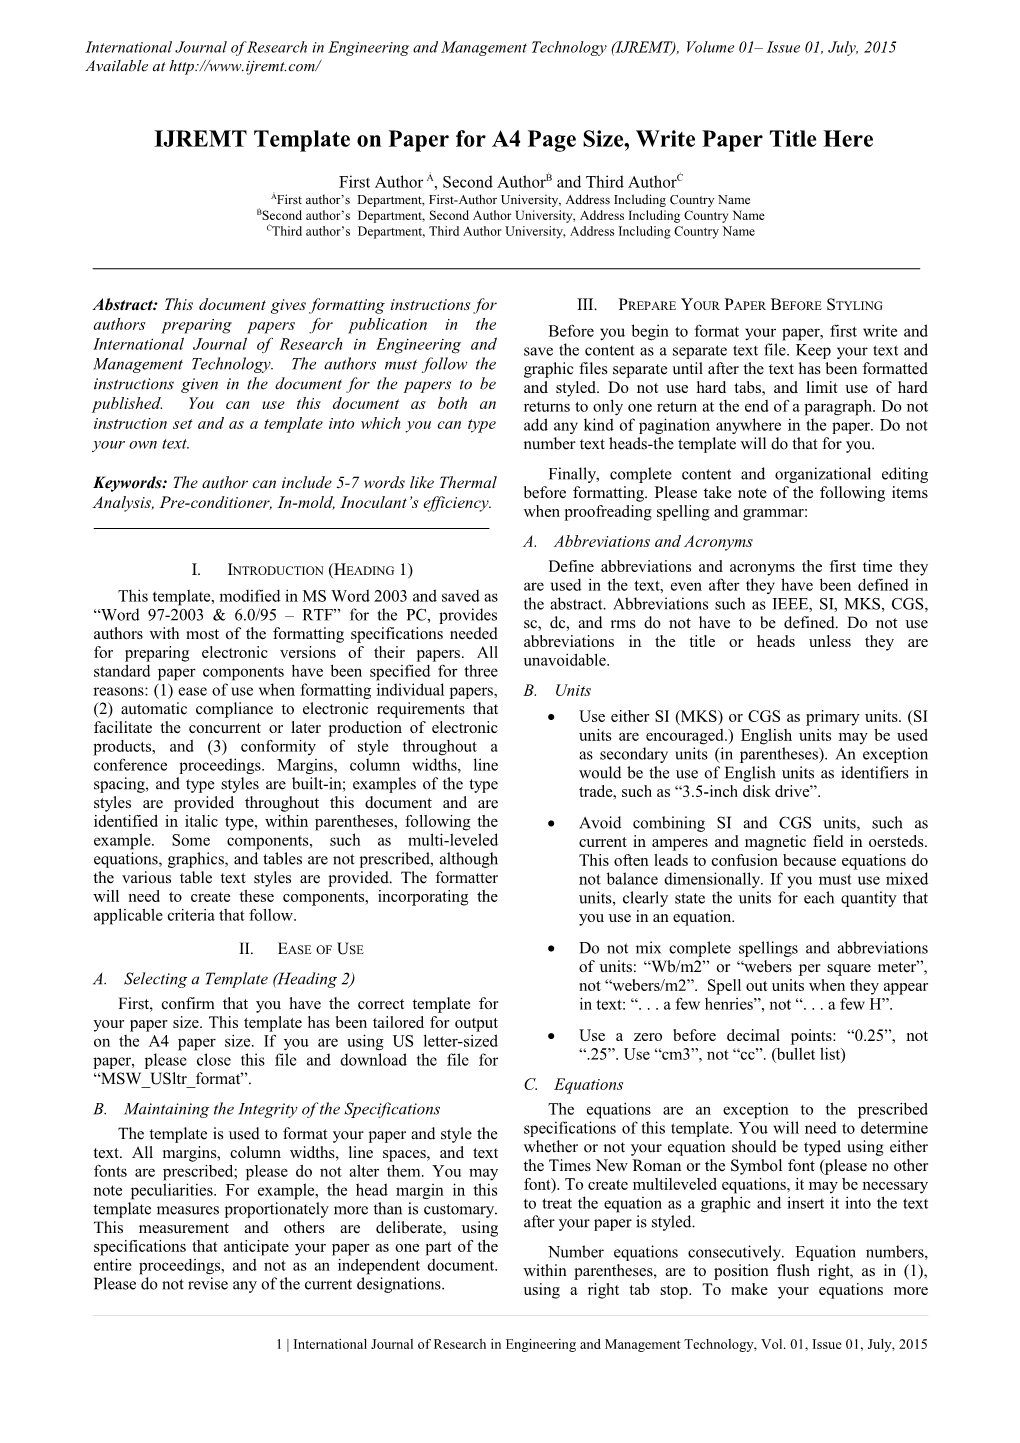 IJREMT Template on Paper for A4 Page Size, Write Paper Title Here